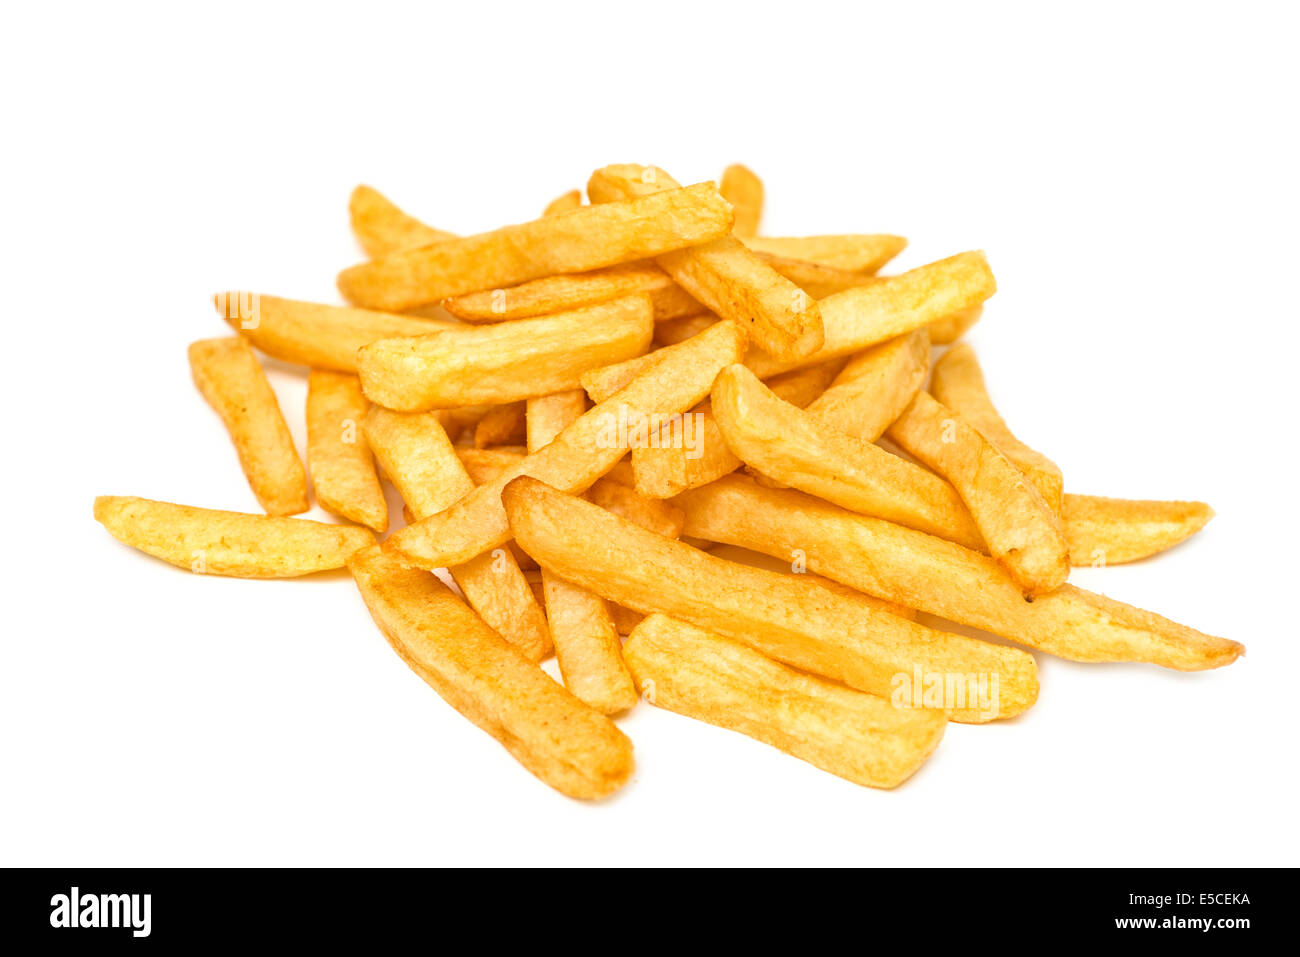 Fries, patatine fritte Foto Stock